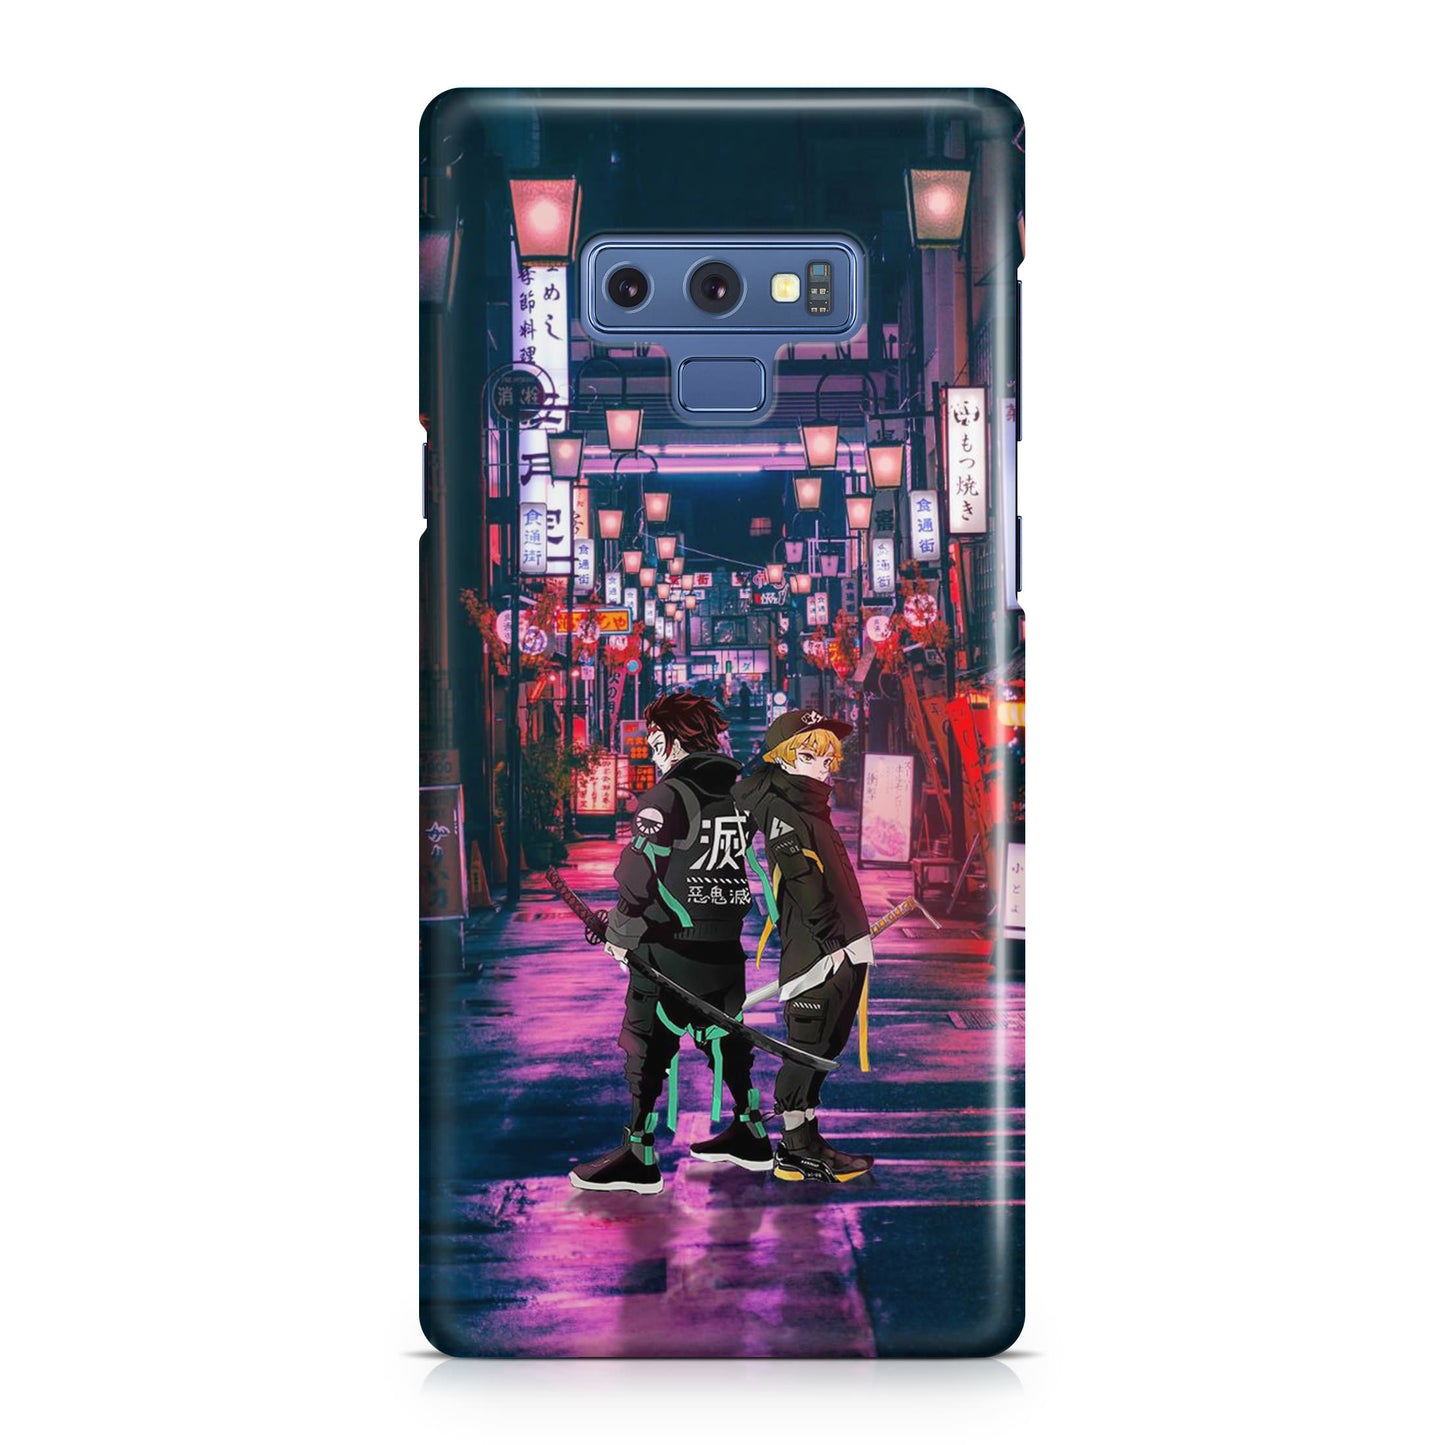 Tanjir0 And Zenittsu in Style Galaxy Note 9 Case